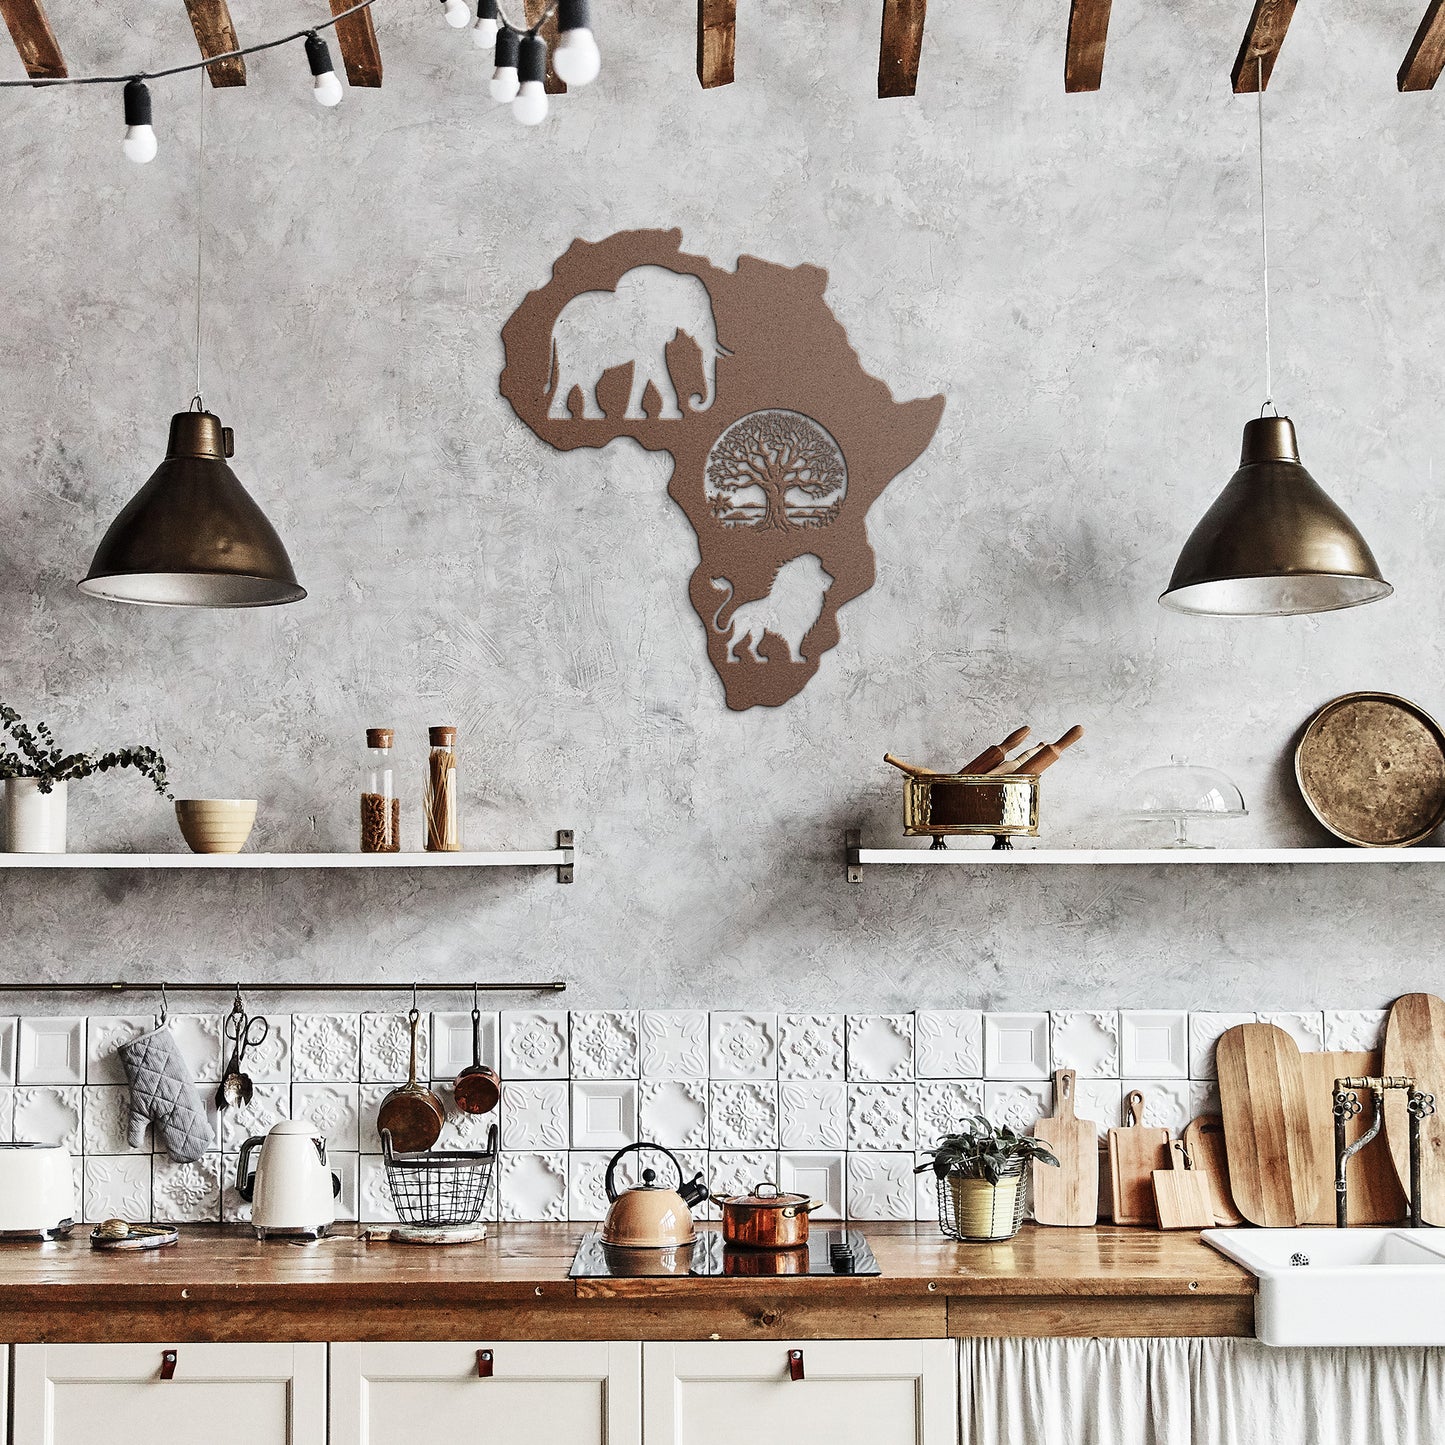 Africa’s Big Five - Die-Cut Metal Wall Art - Elephant and Lion #16